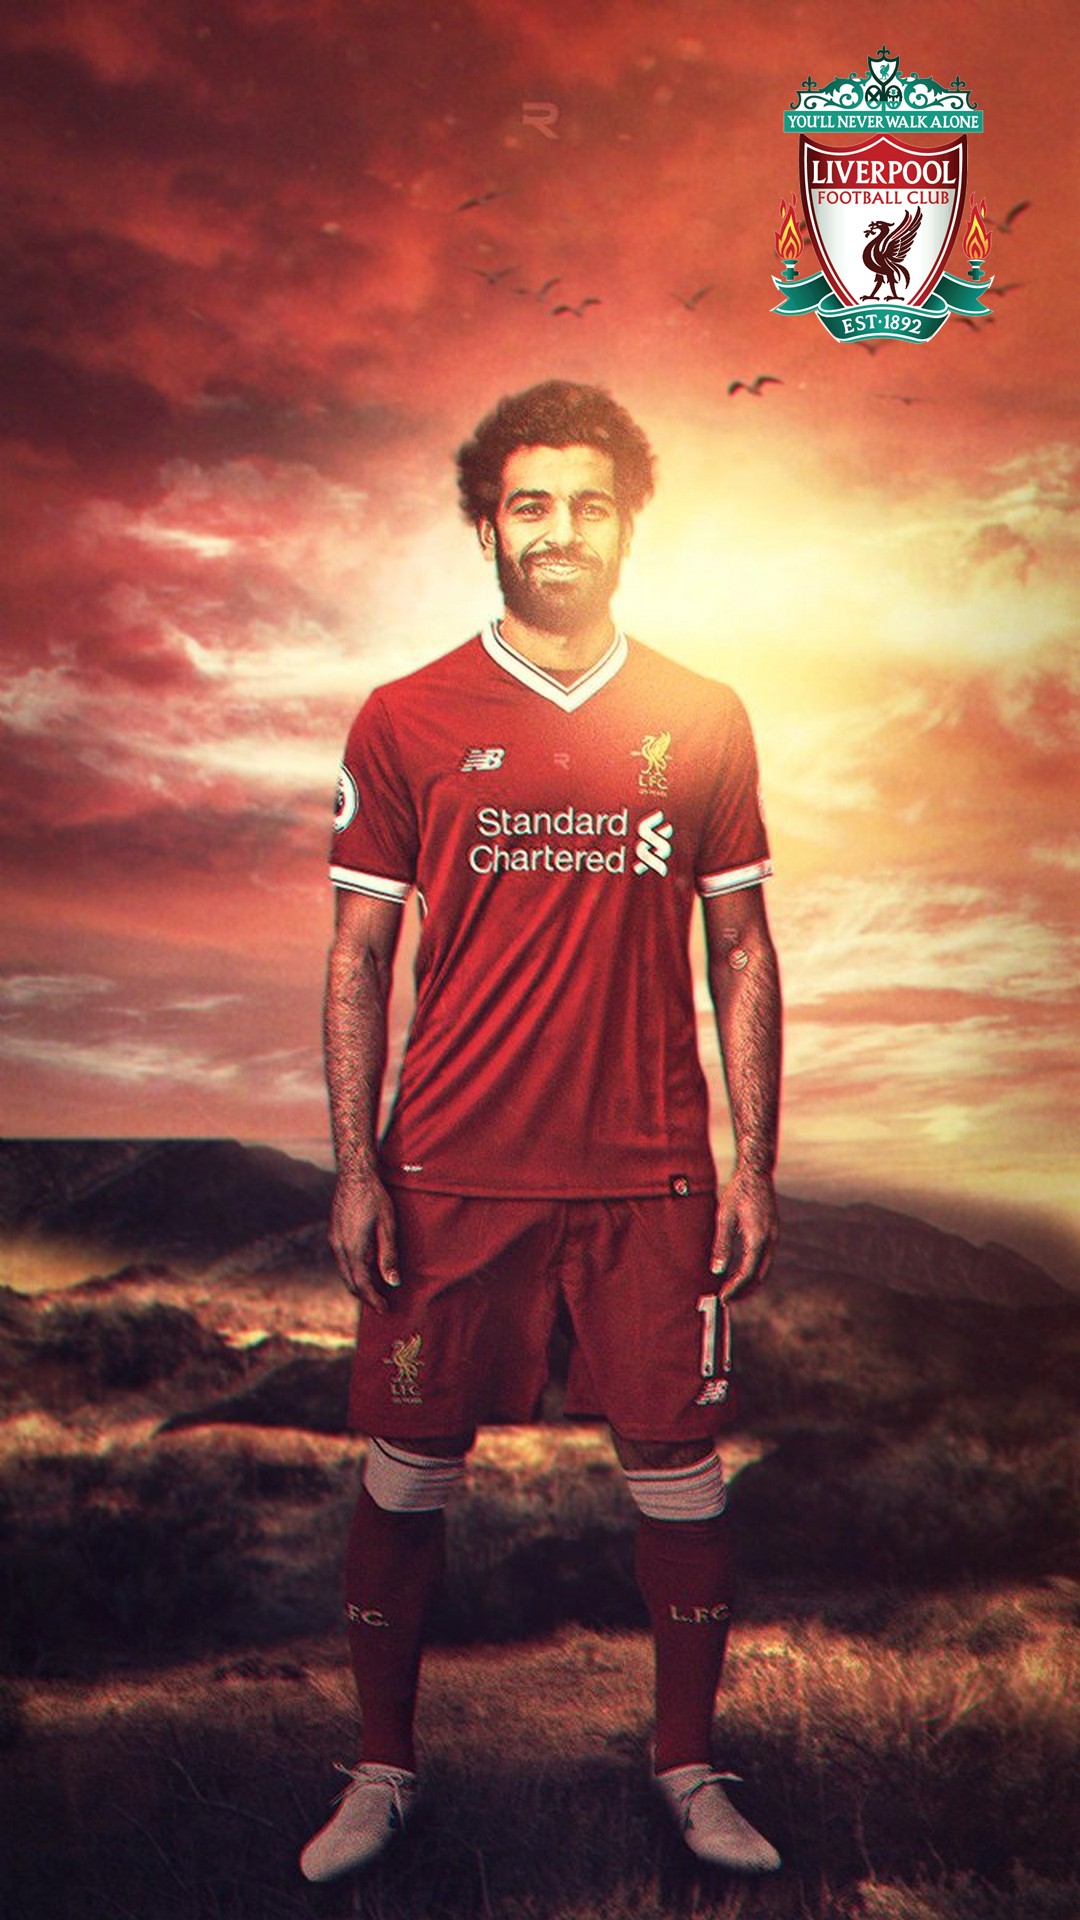 Salah Liverpool Wallpaper iPhone with image resolution 1080x1920 pixel. You can make this wallpaper for your iPhone 5, 6, 7, 8, X backgrounds, Mobile Screensaver, or iPad Lock Screen